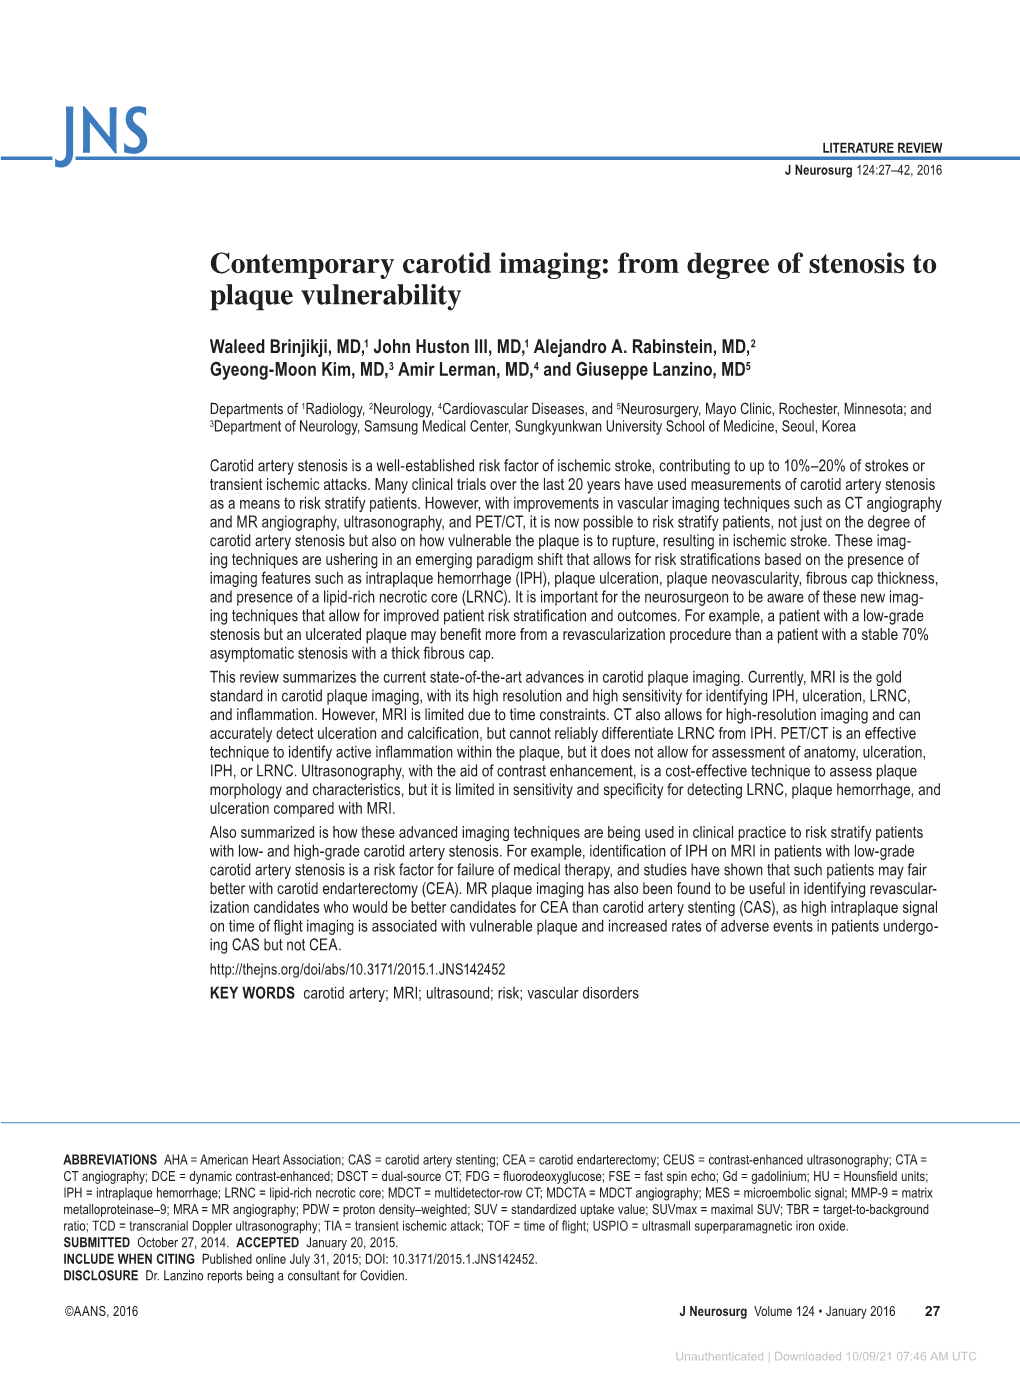 Contemporary Carotid Imaging: from Degree of Stenosis to Plaque Vulnerability